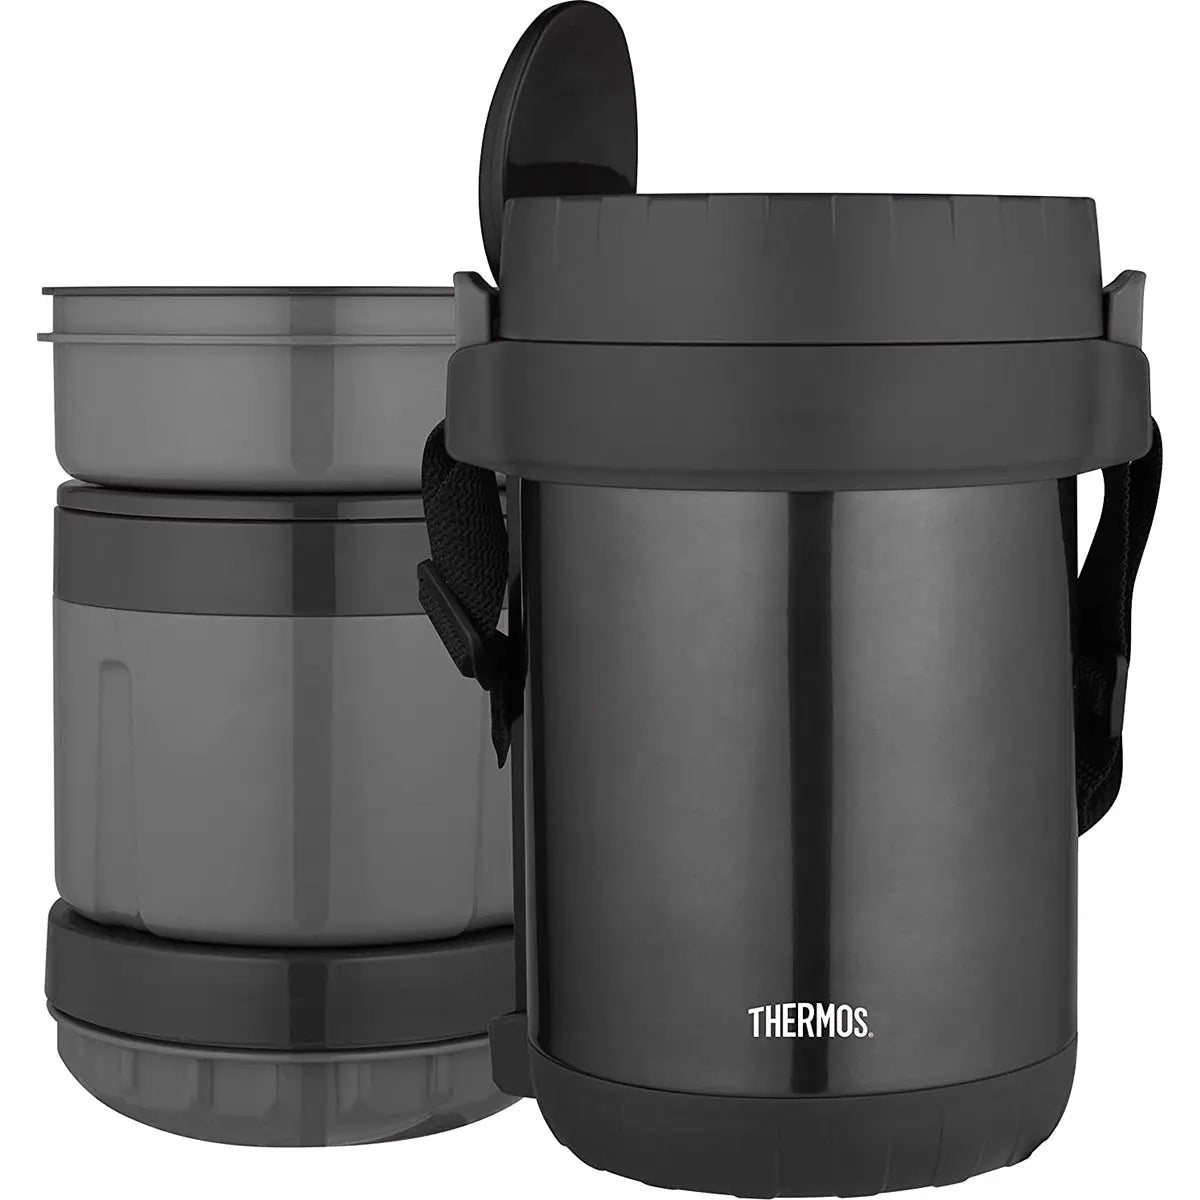 Thermos Vacuum Insulated All-In-One Meal Carrier with Spoon - Stainless Steel Thermos